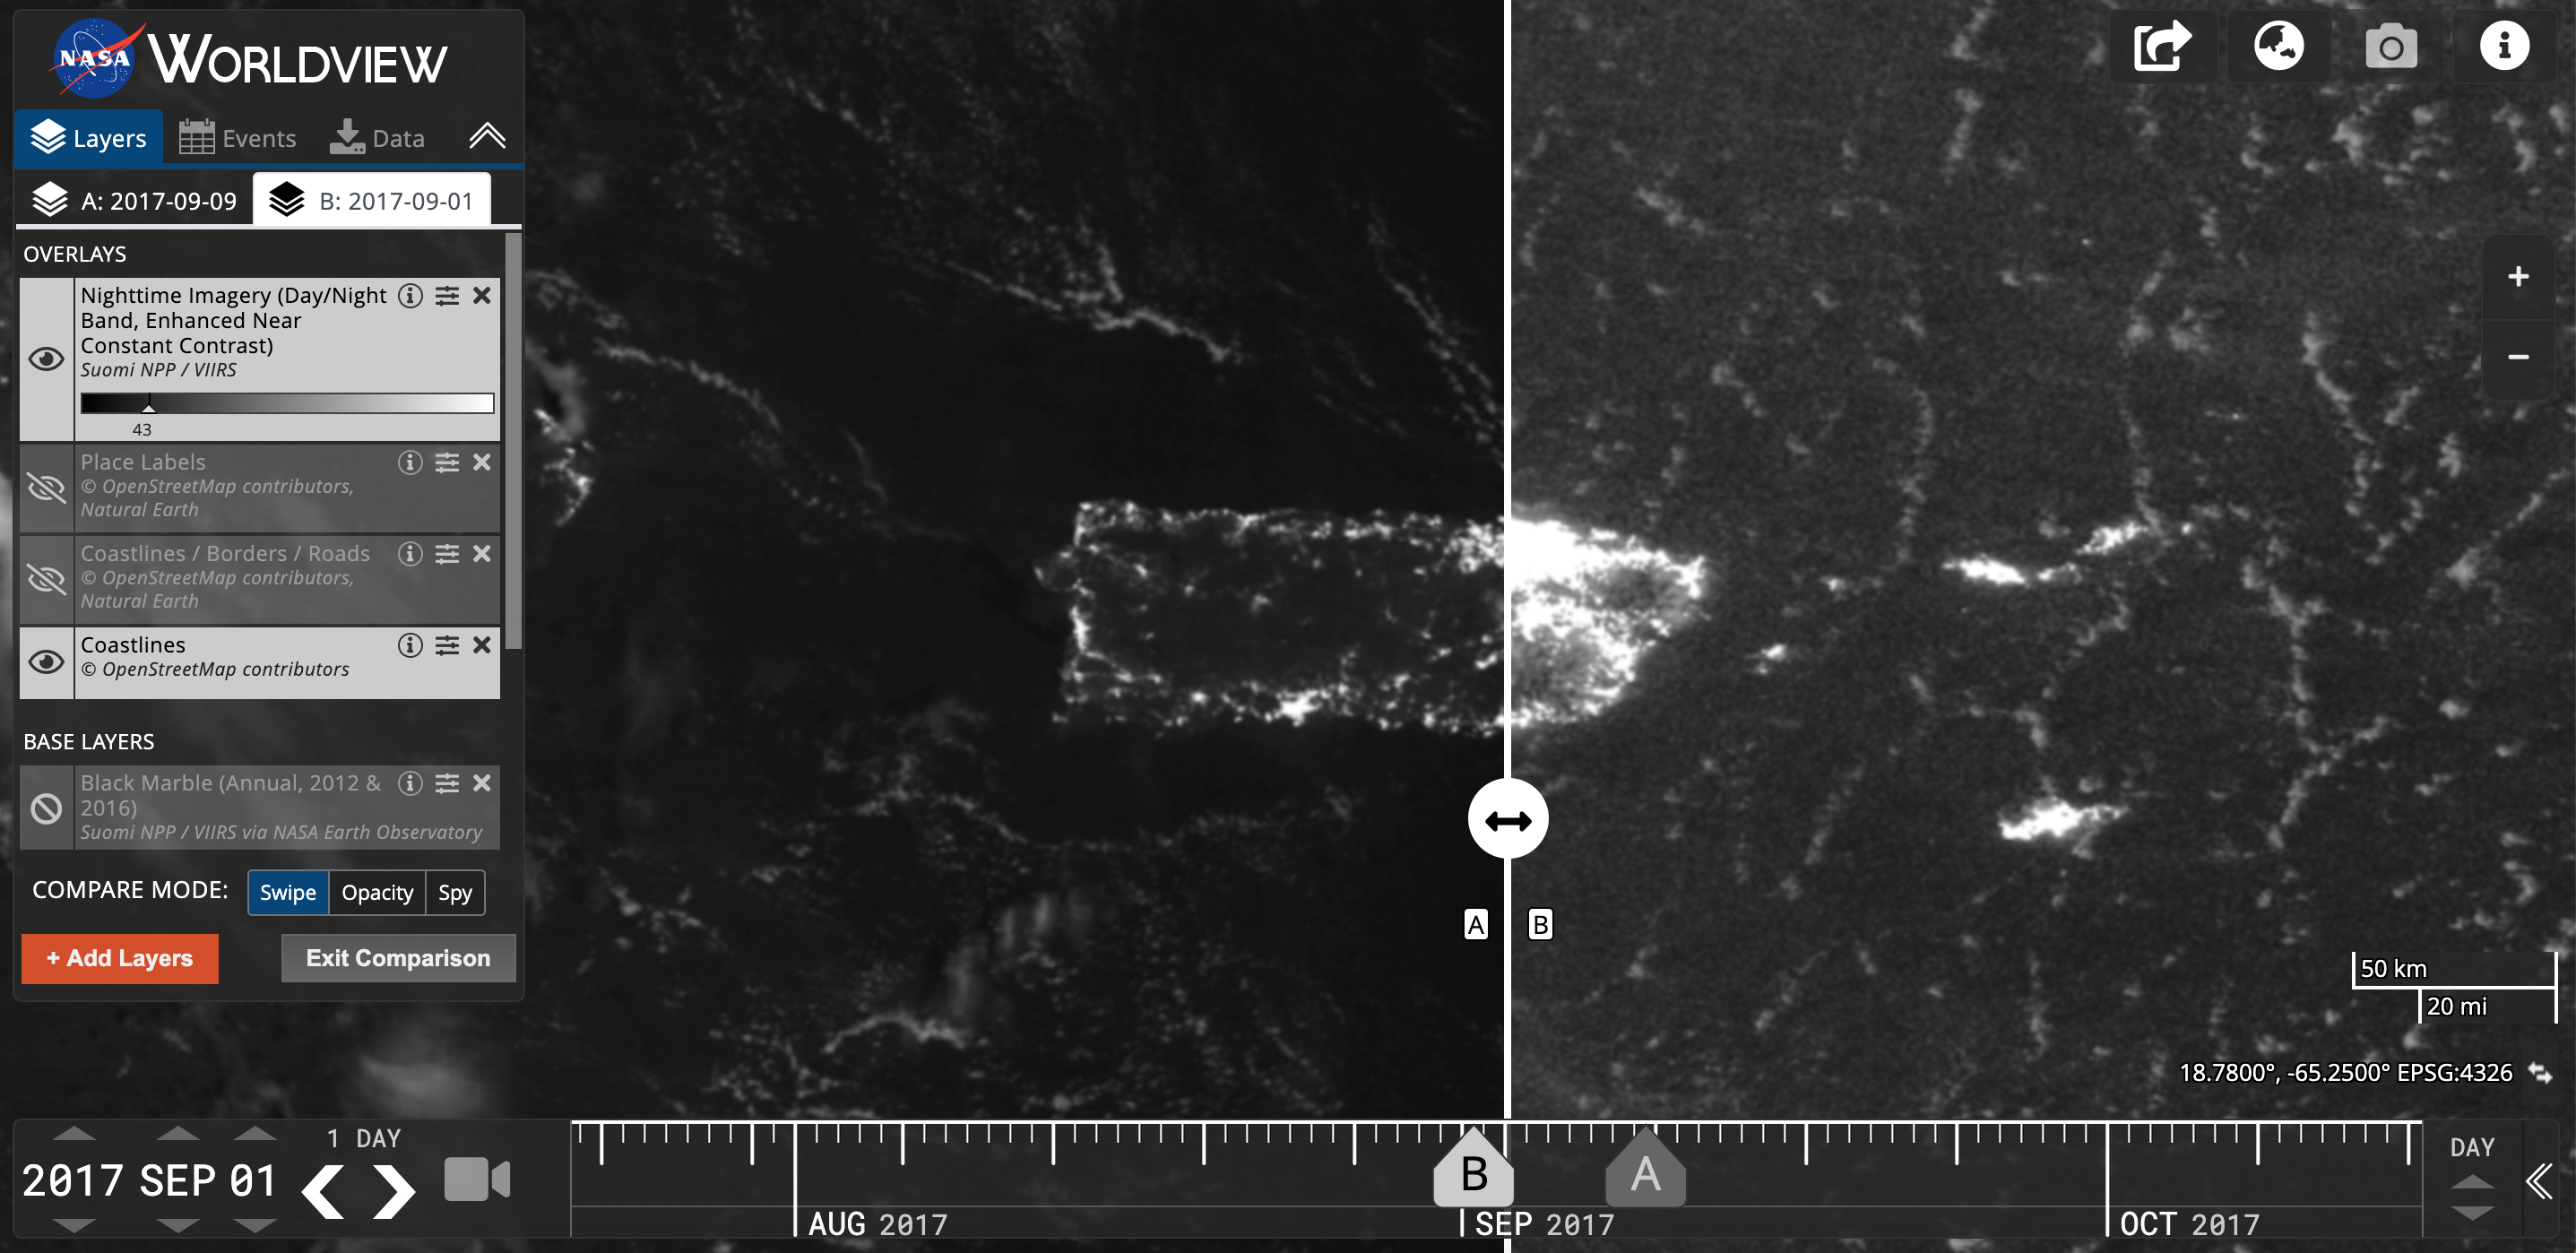 Worldview data visualization of the nighttime lights in Puerto Rico pre- and post- Hurricane Maria, which made landfall on September 20, 2017. The post-hurricane image on the left shows widespread outages around San Juan, including key hospital and transportation infrastructure.​